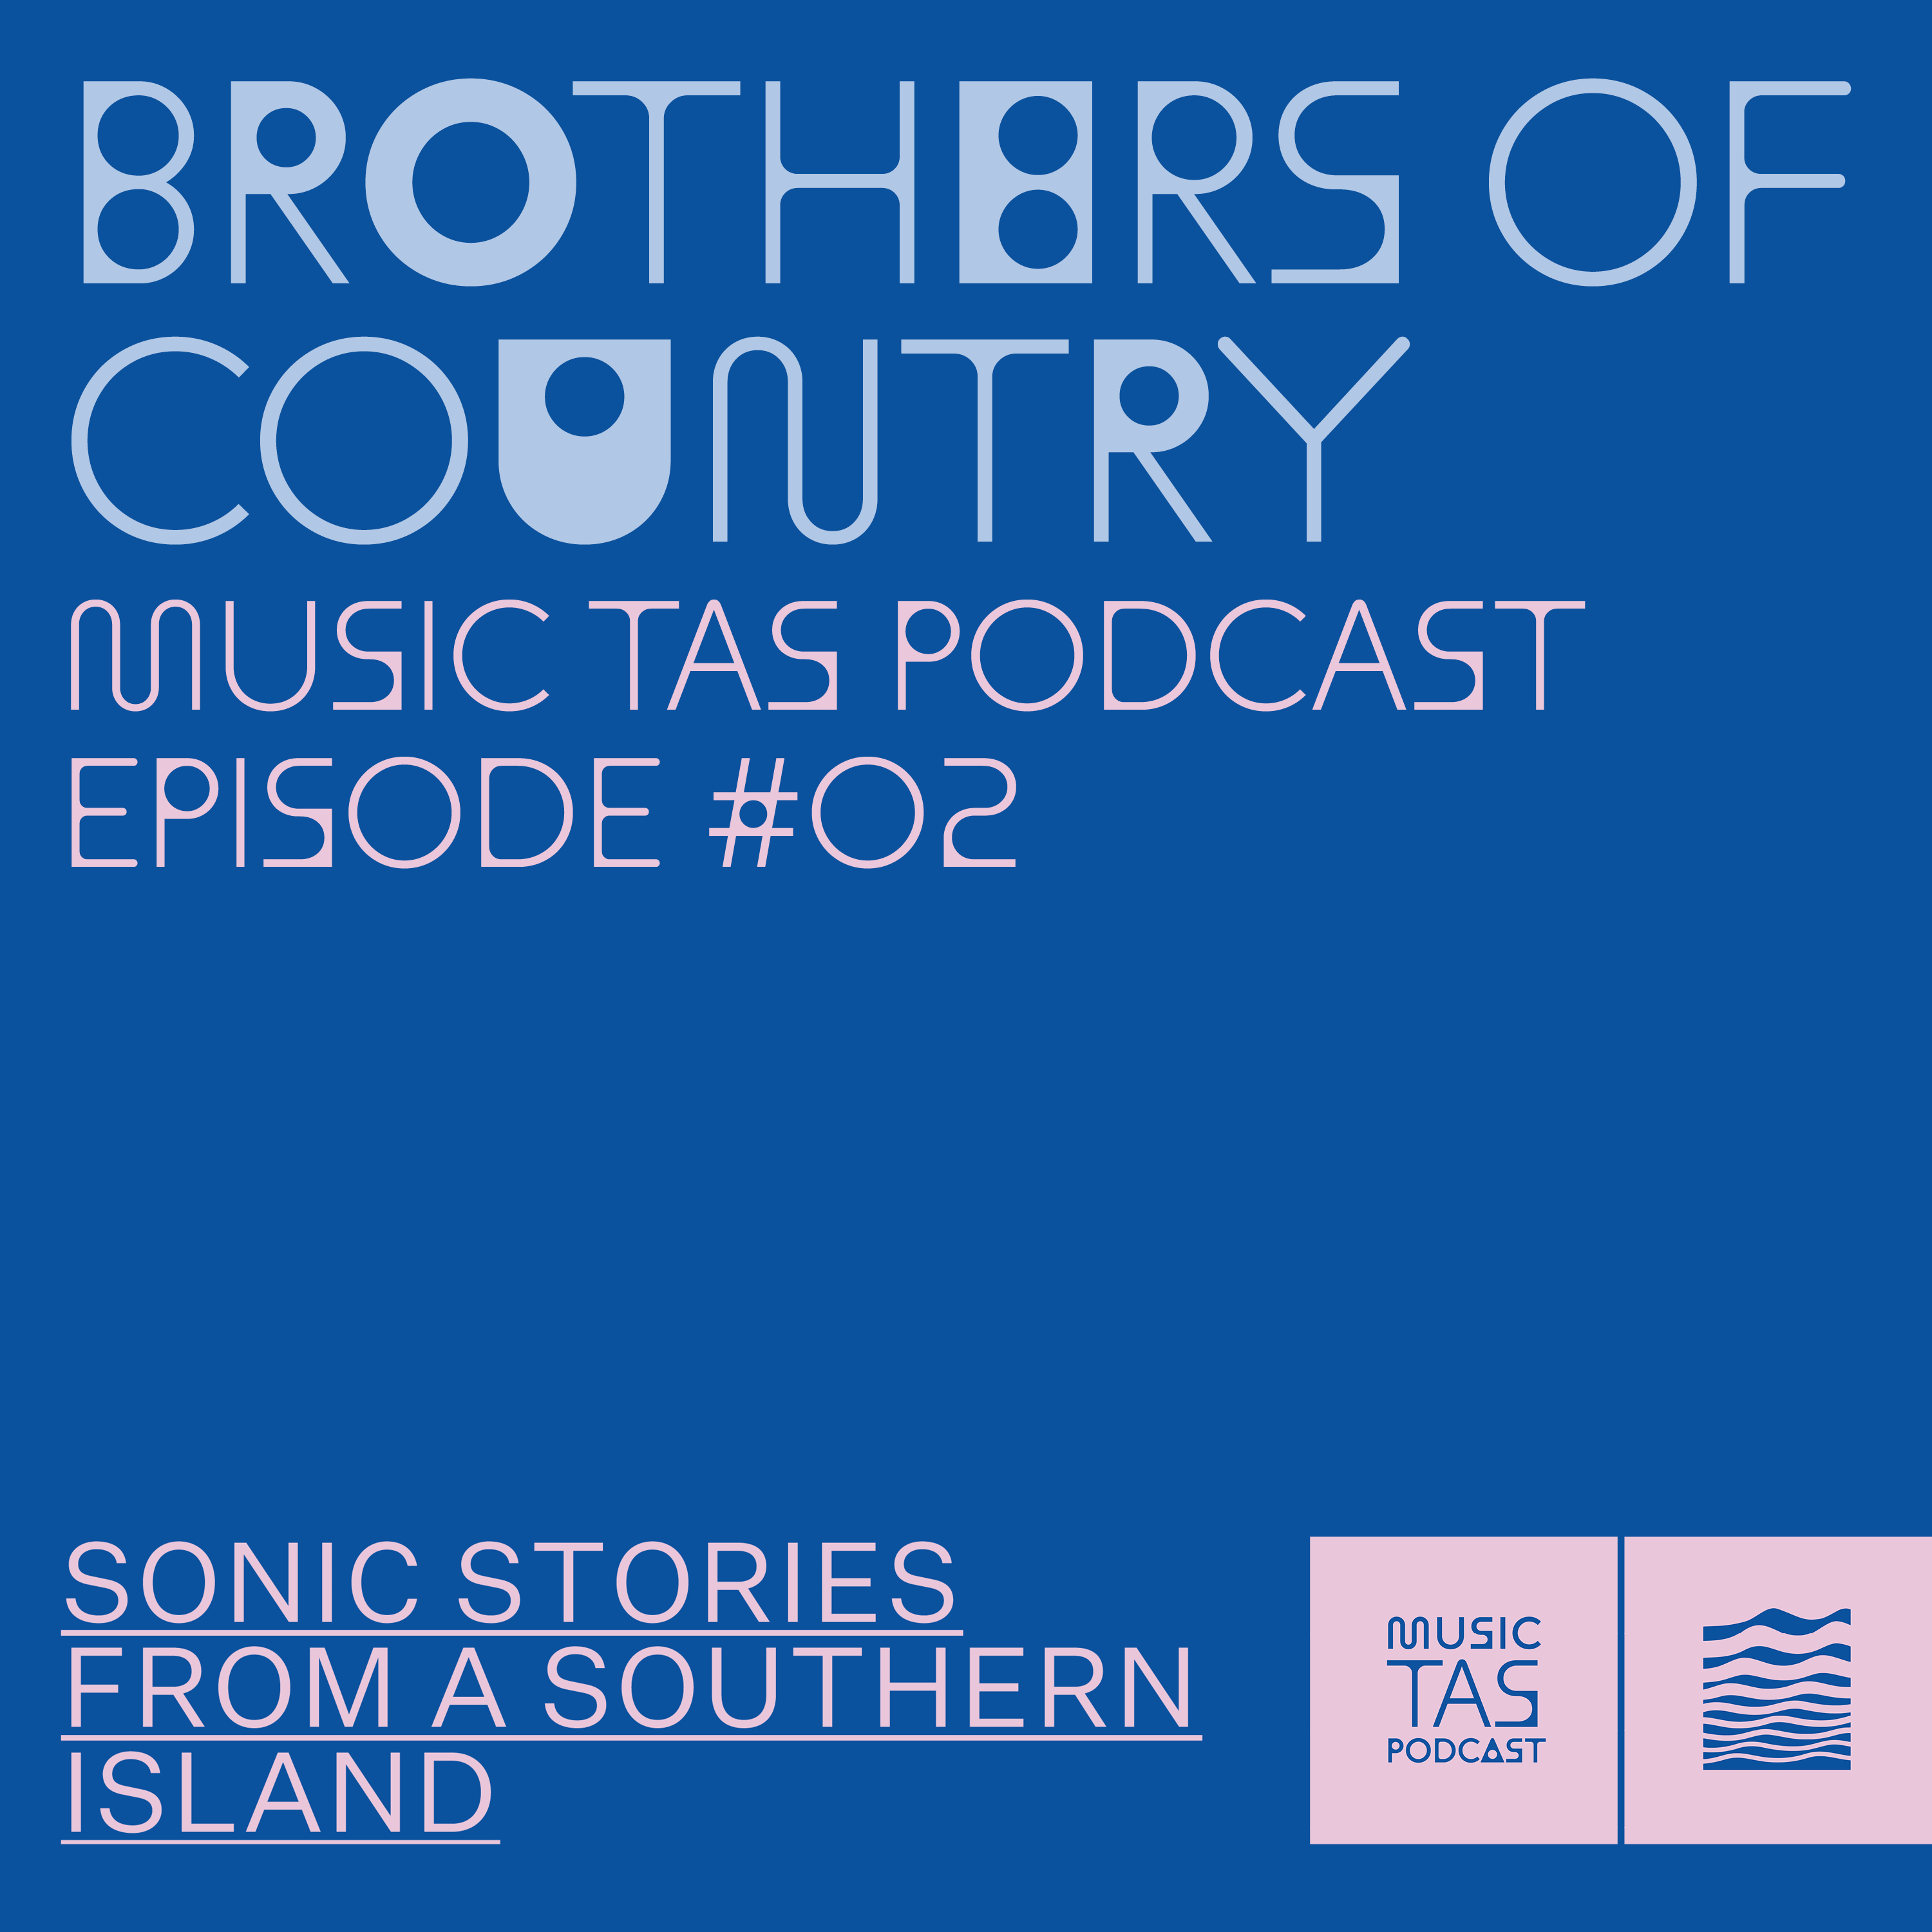 Music Tas Podcast Episode #02: Brothers of Country